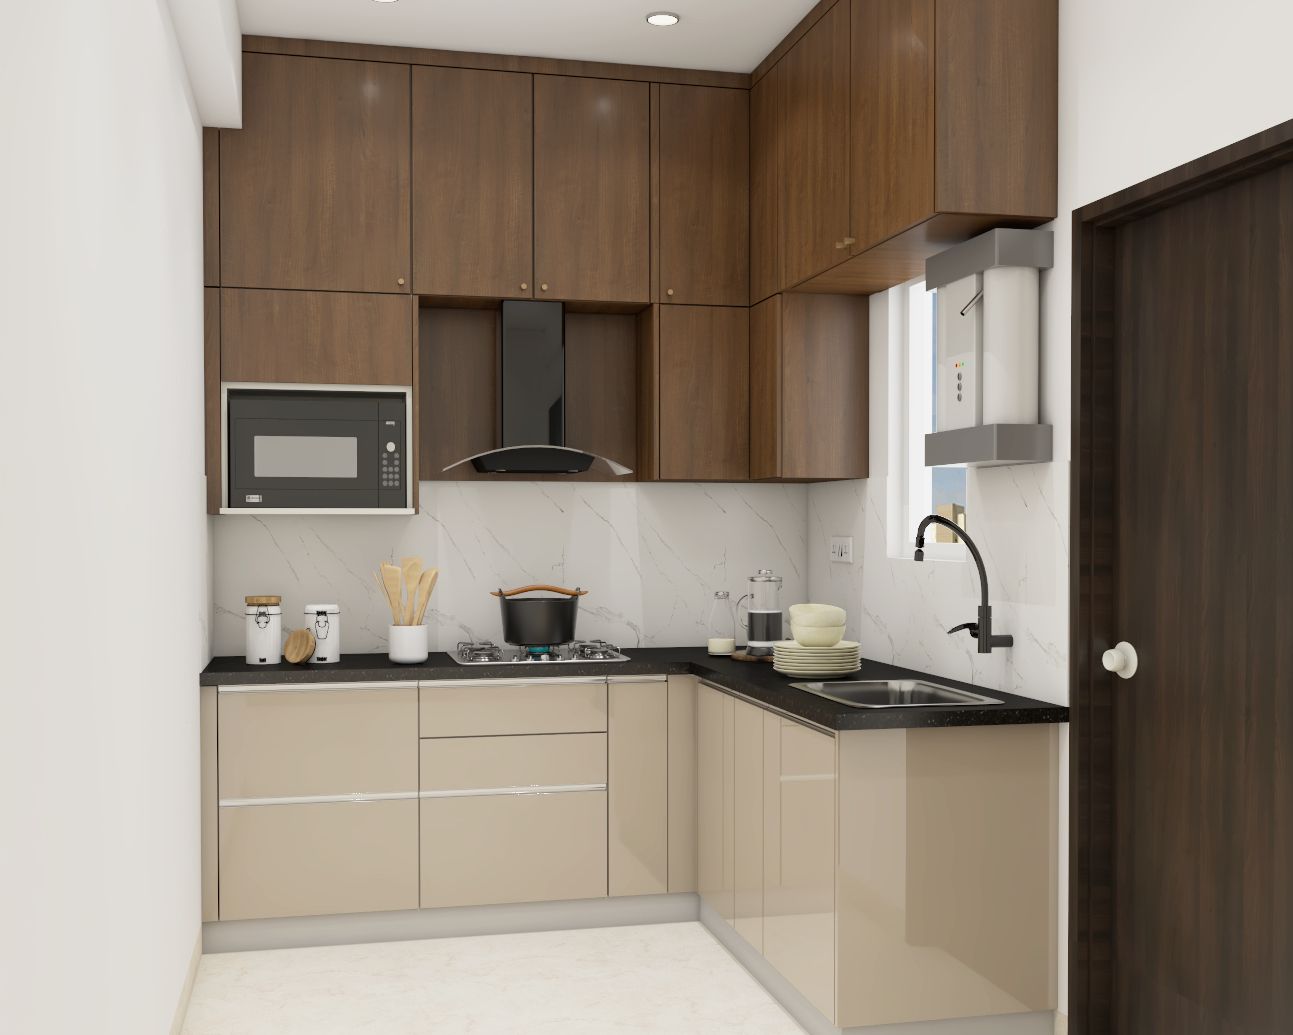 Compact Modular Kitchen Design Idea With L-Shaped Layout